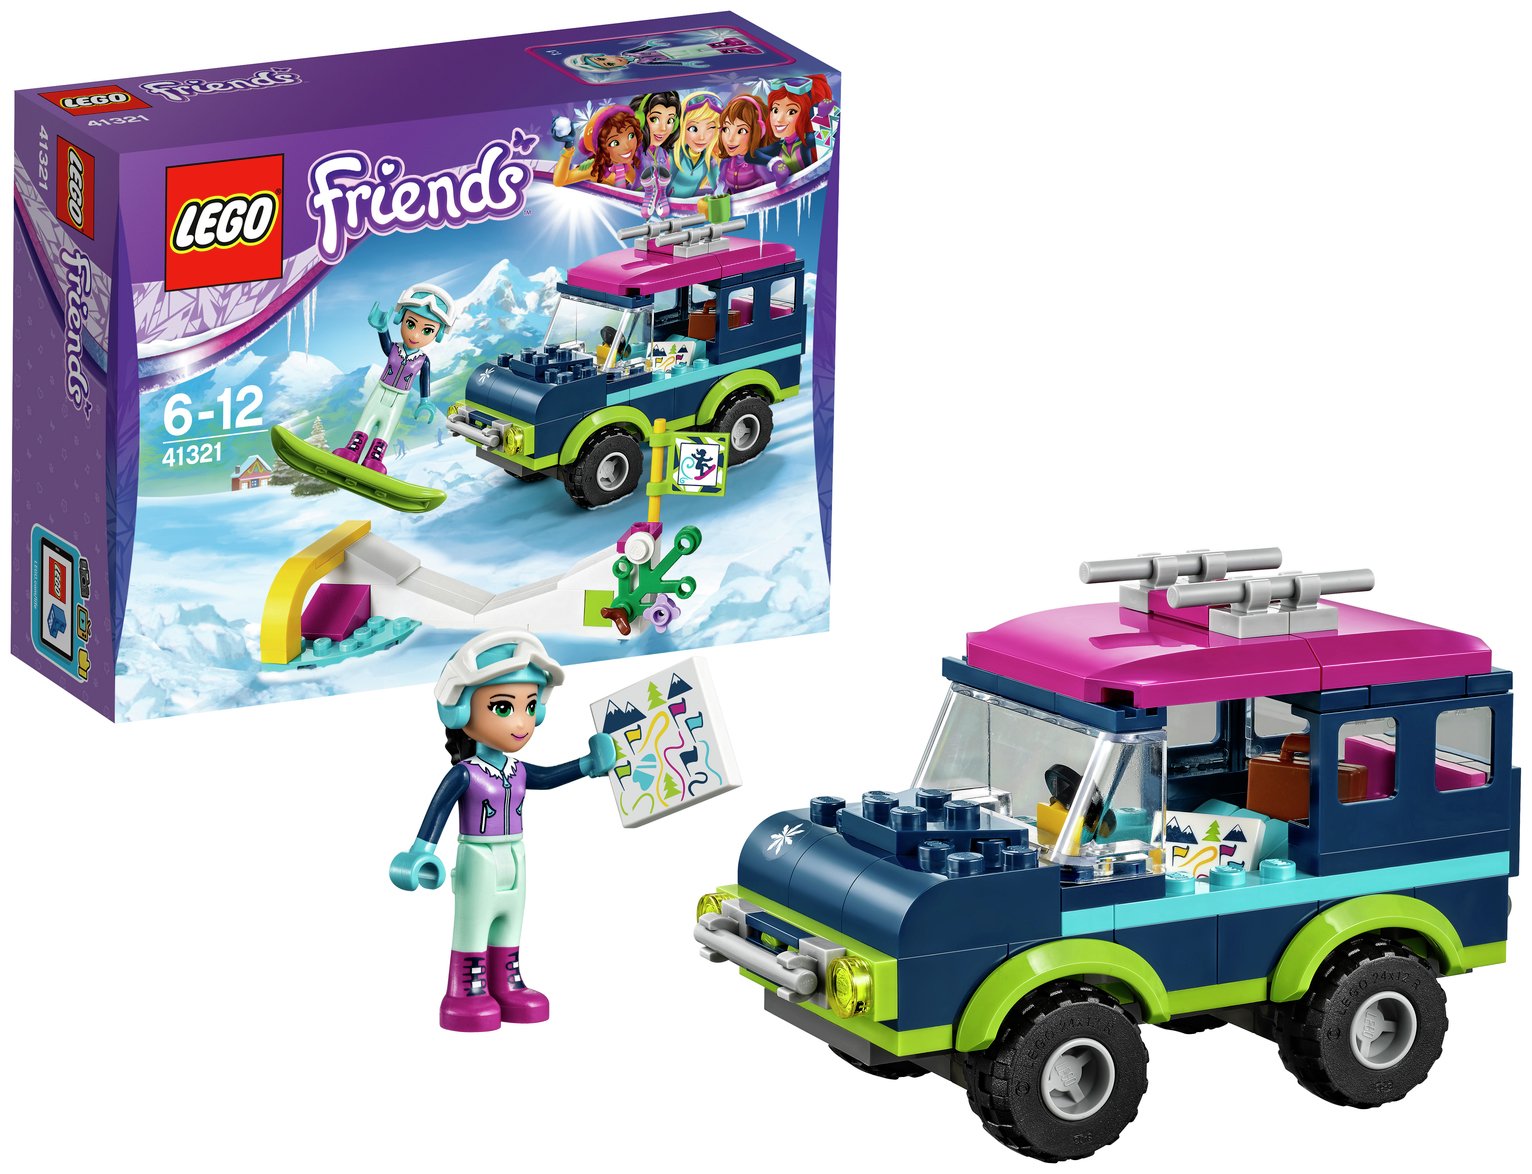 LEGO Friends Snow Resort Off Roader - 41321. Review